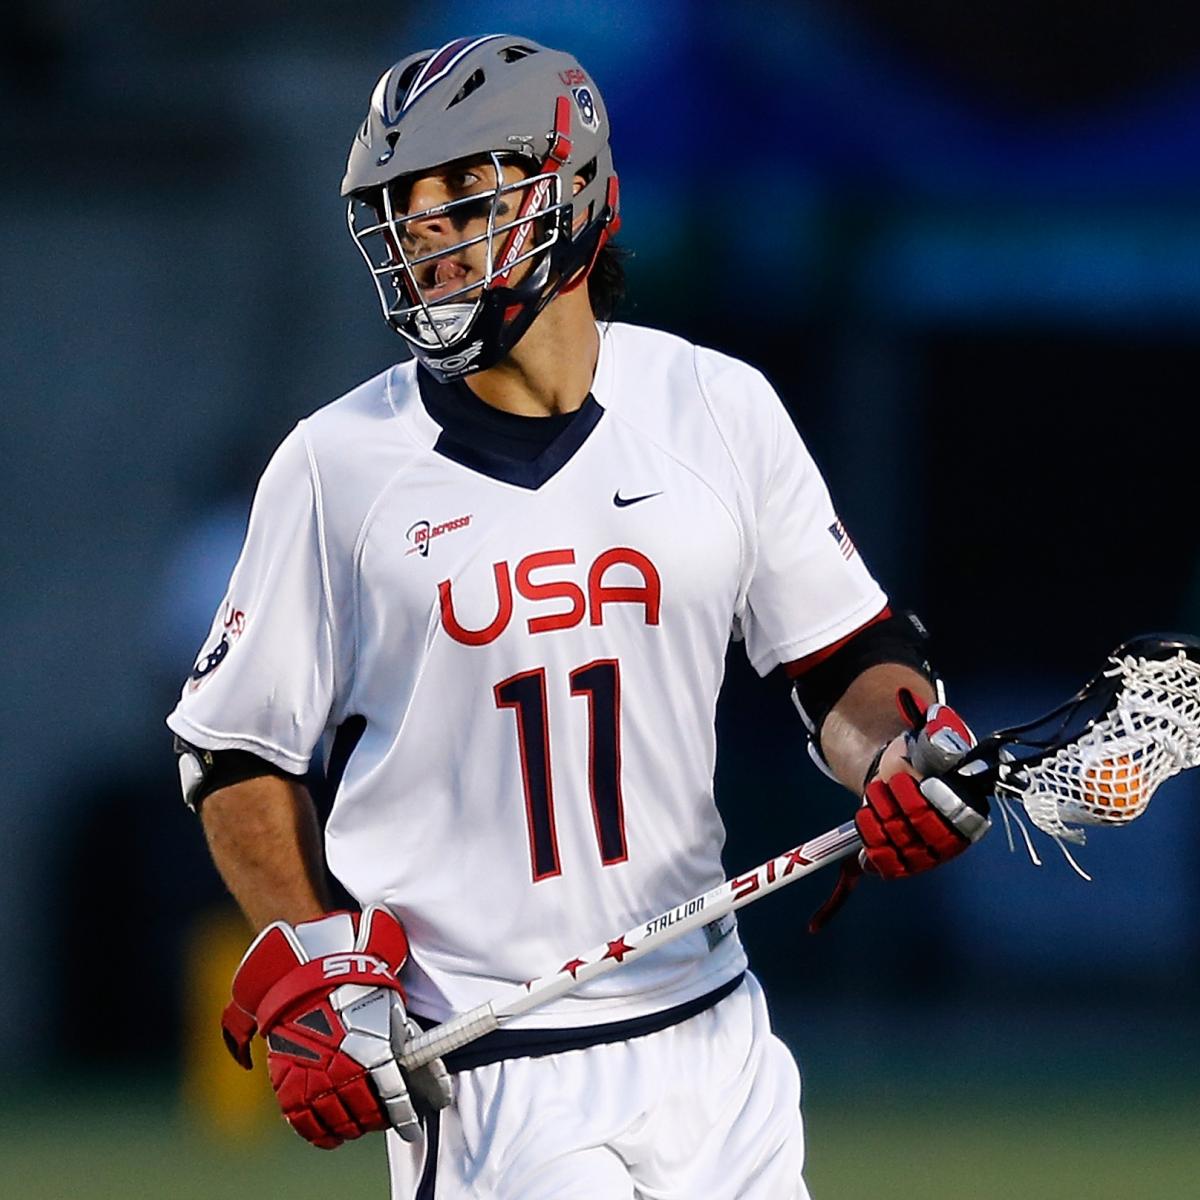 USA vs. Canada 2014 World Lacrosse Championships Game Date and Start